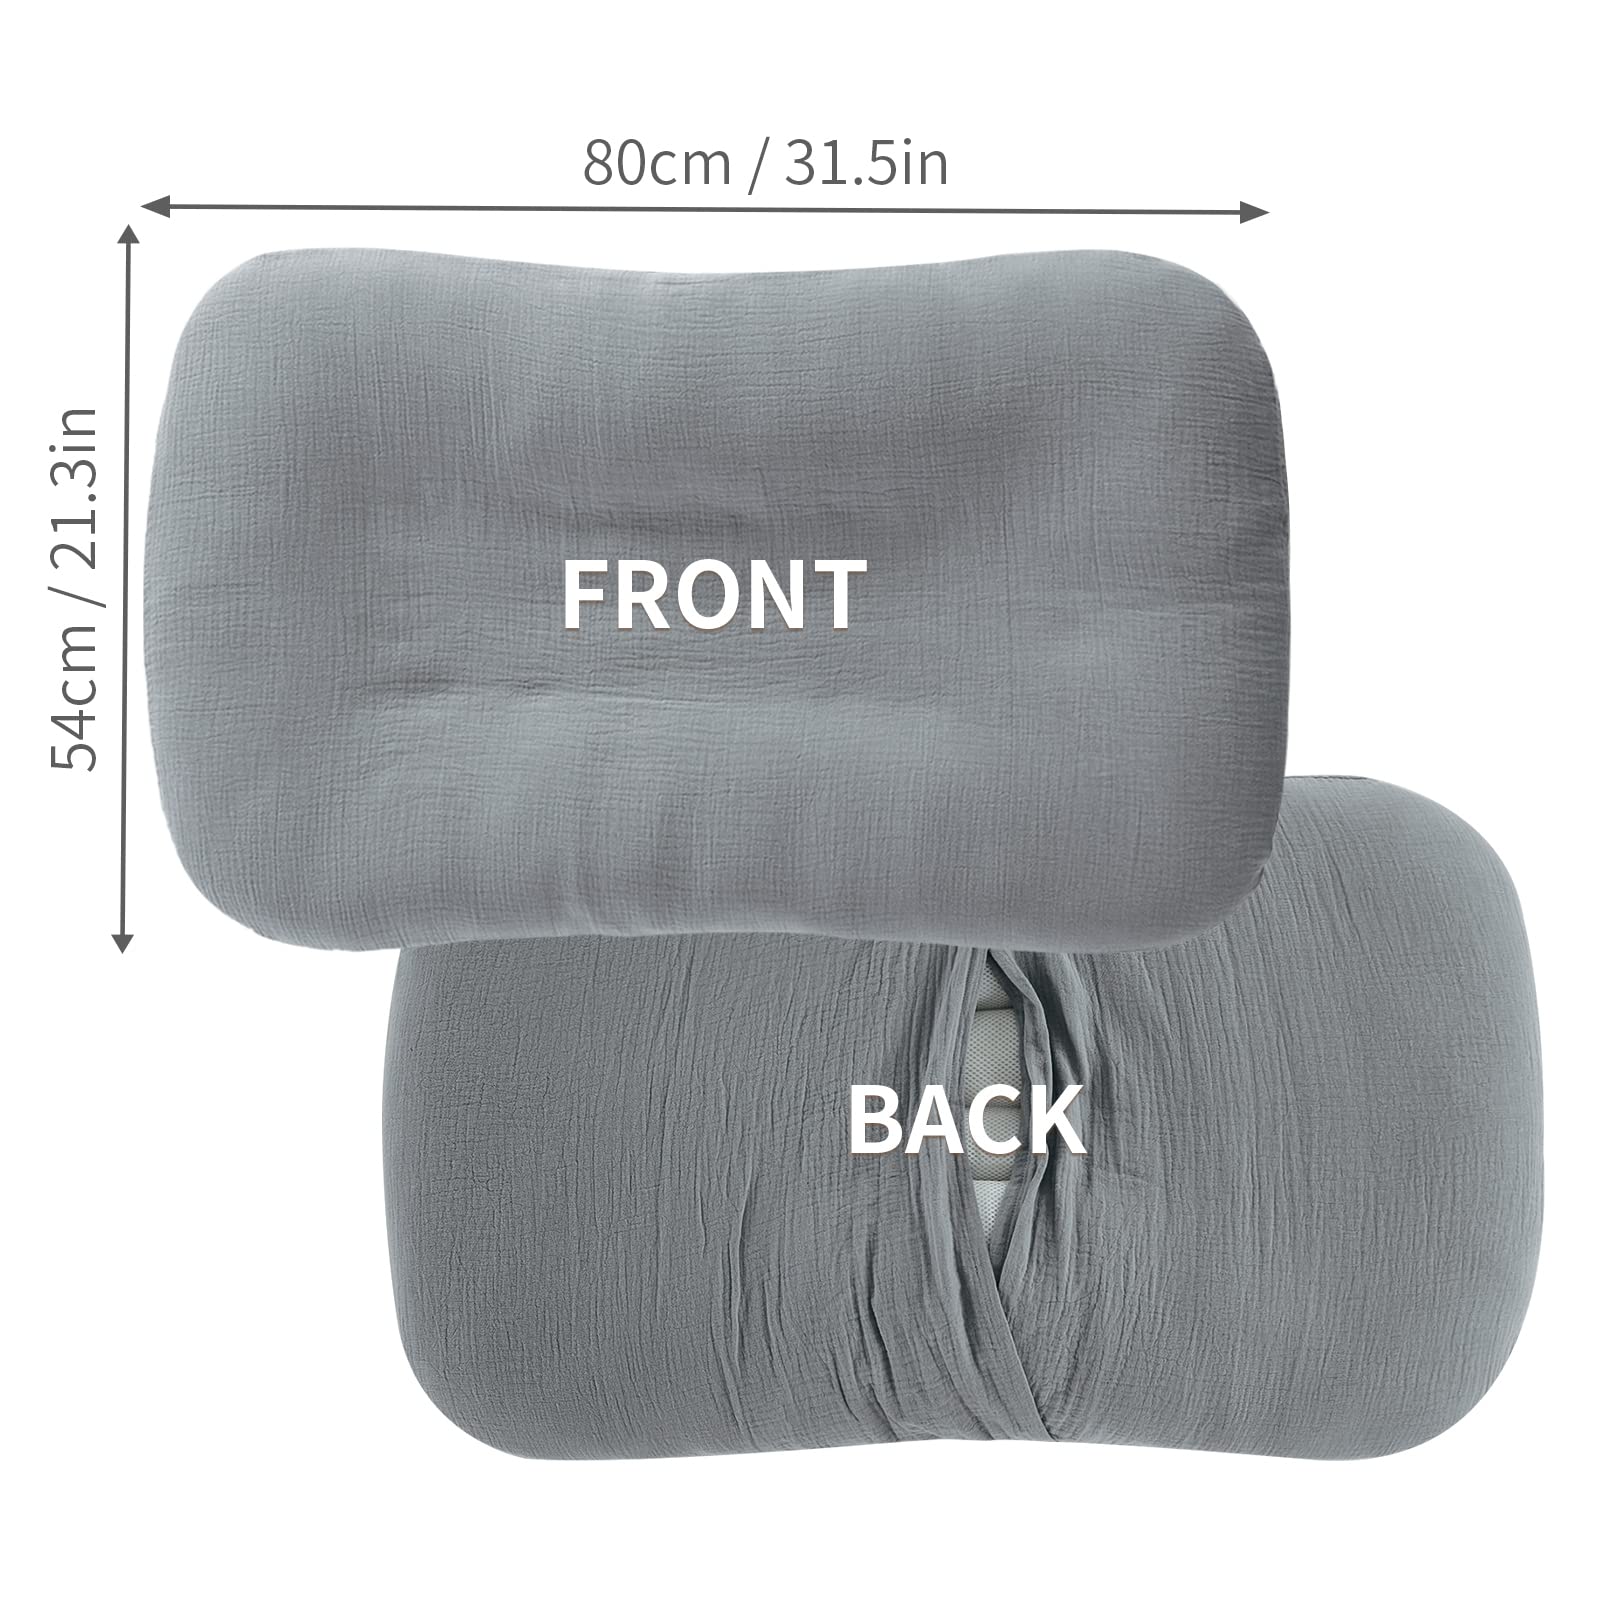 HOMBYS Muslin Baby Lounger Cover 2 Pack for Newborn, 100% Cotton Lounger Slipcover, Ultra Soft Removable Cover for Infant Lounger Pillow (Blue & Grey)